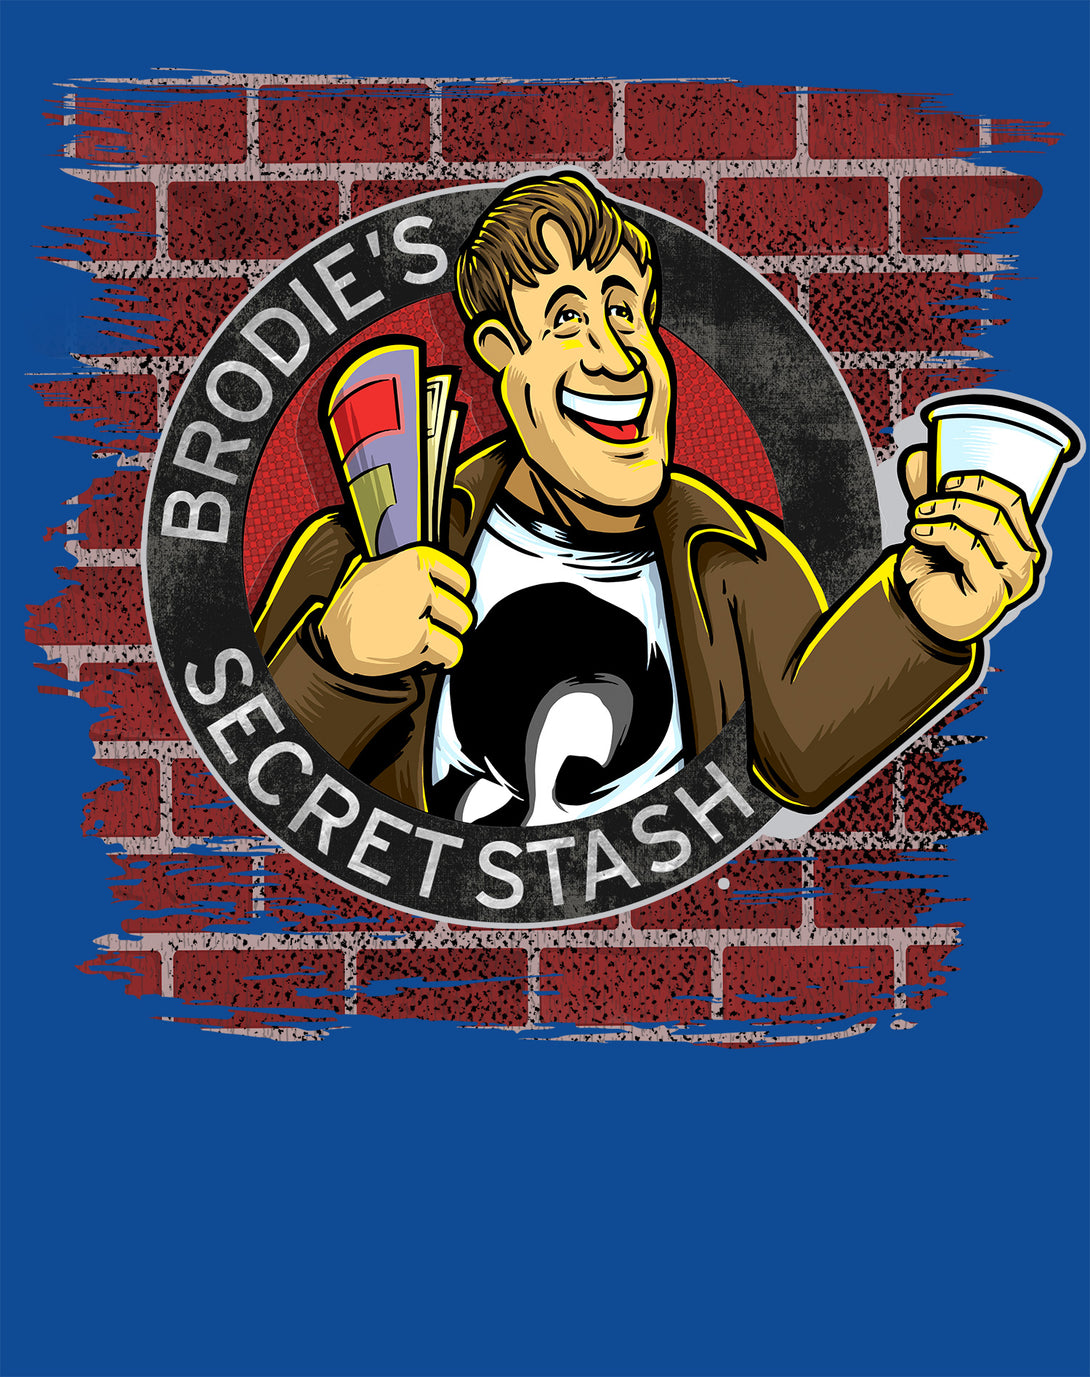 Kevin Smith Jay & Silent Bob Reboot Brodie's Secret Stash Store Logo Wall Official Men's T-Shirt Blue - Urban Species Design Close Up